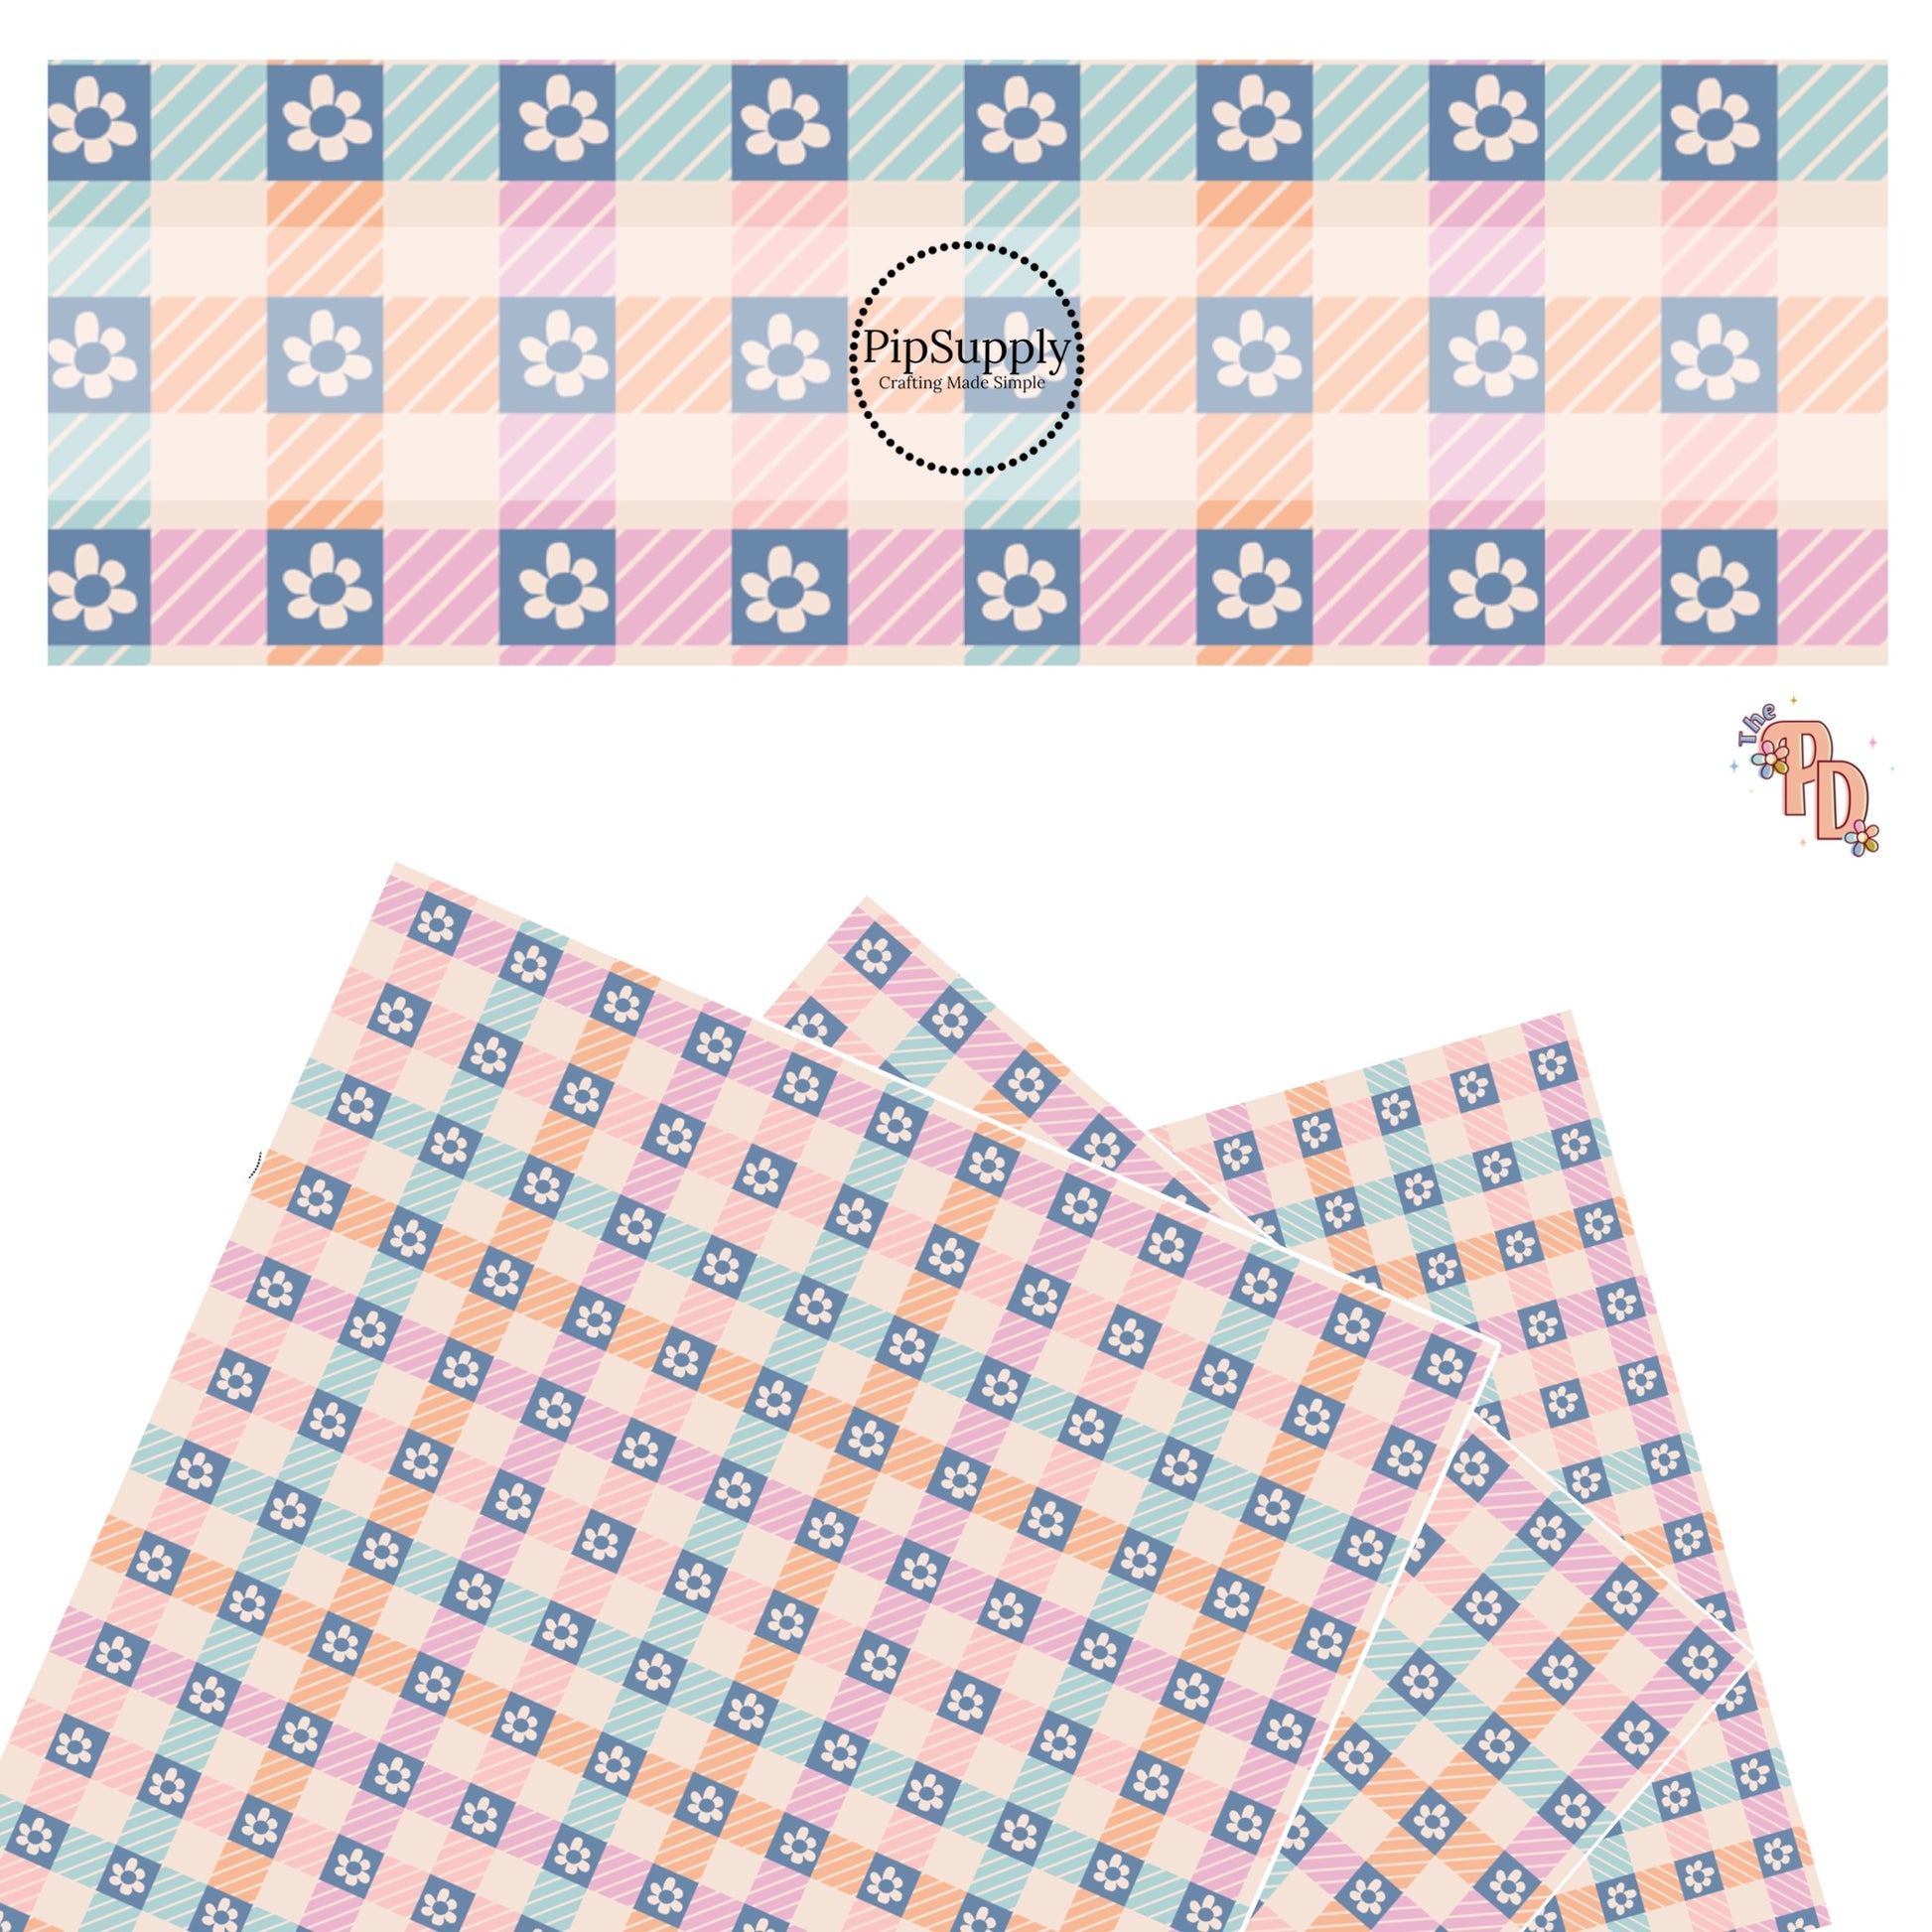 These spring checker pattern themed faux leather sheets contain the following design elements: small flowers on pink, orange, and blue checkers. Our CPSIA compliant faux leather sheets or rolls can be used for all types of crafting projects.